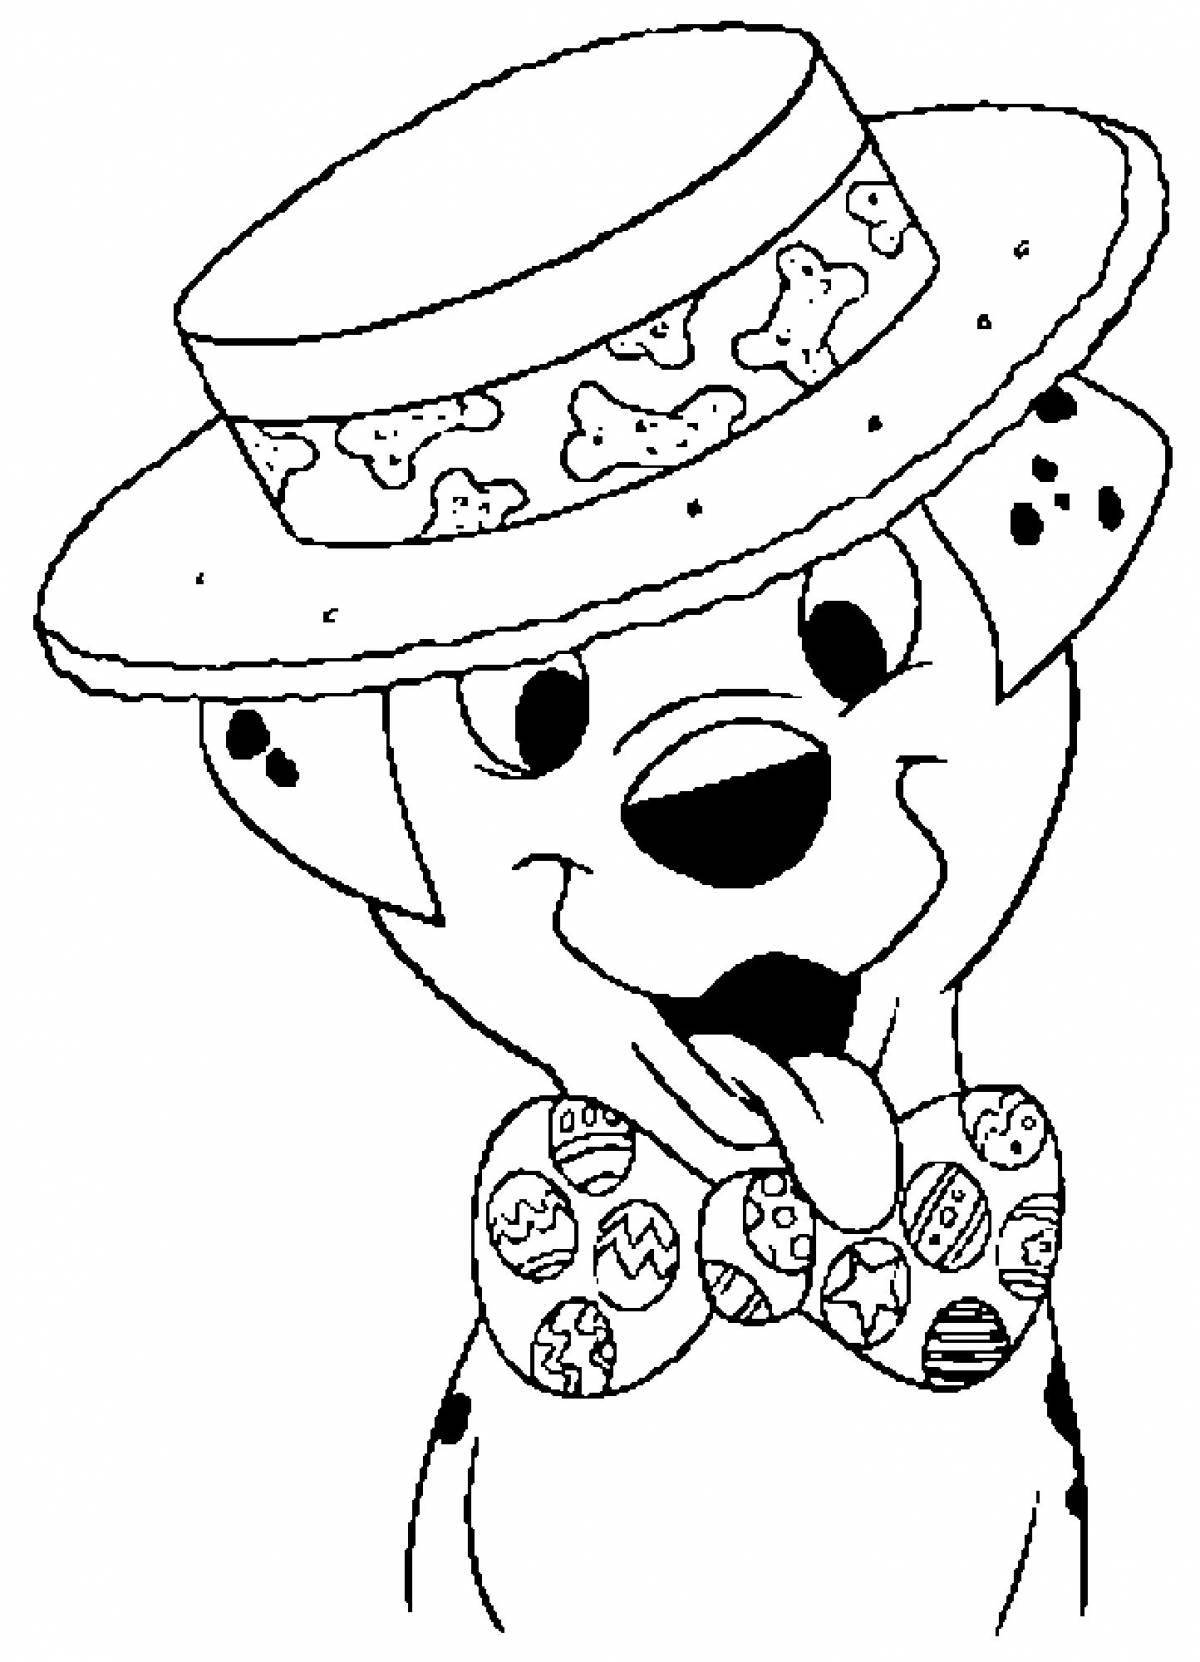 Delightful coloring page 101